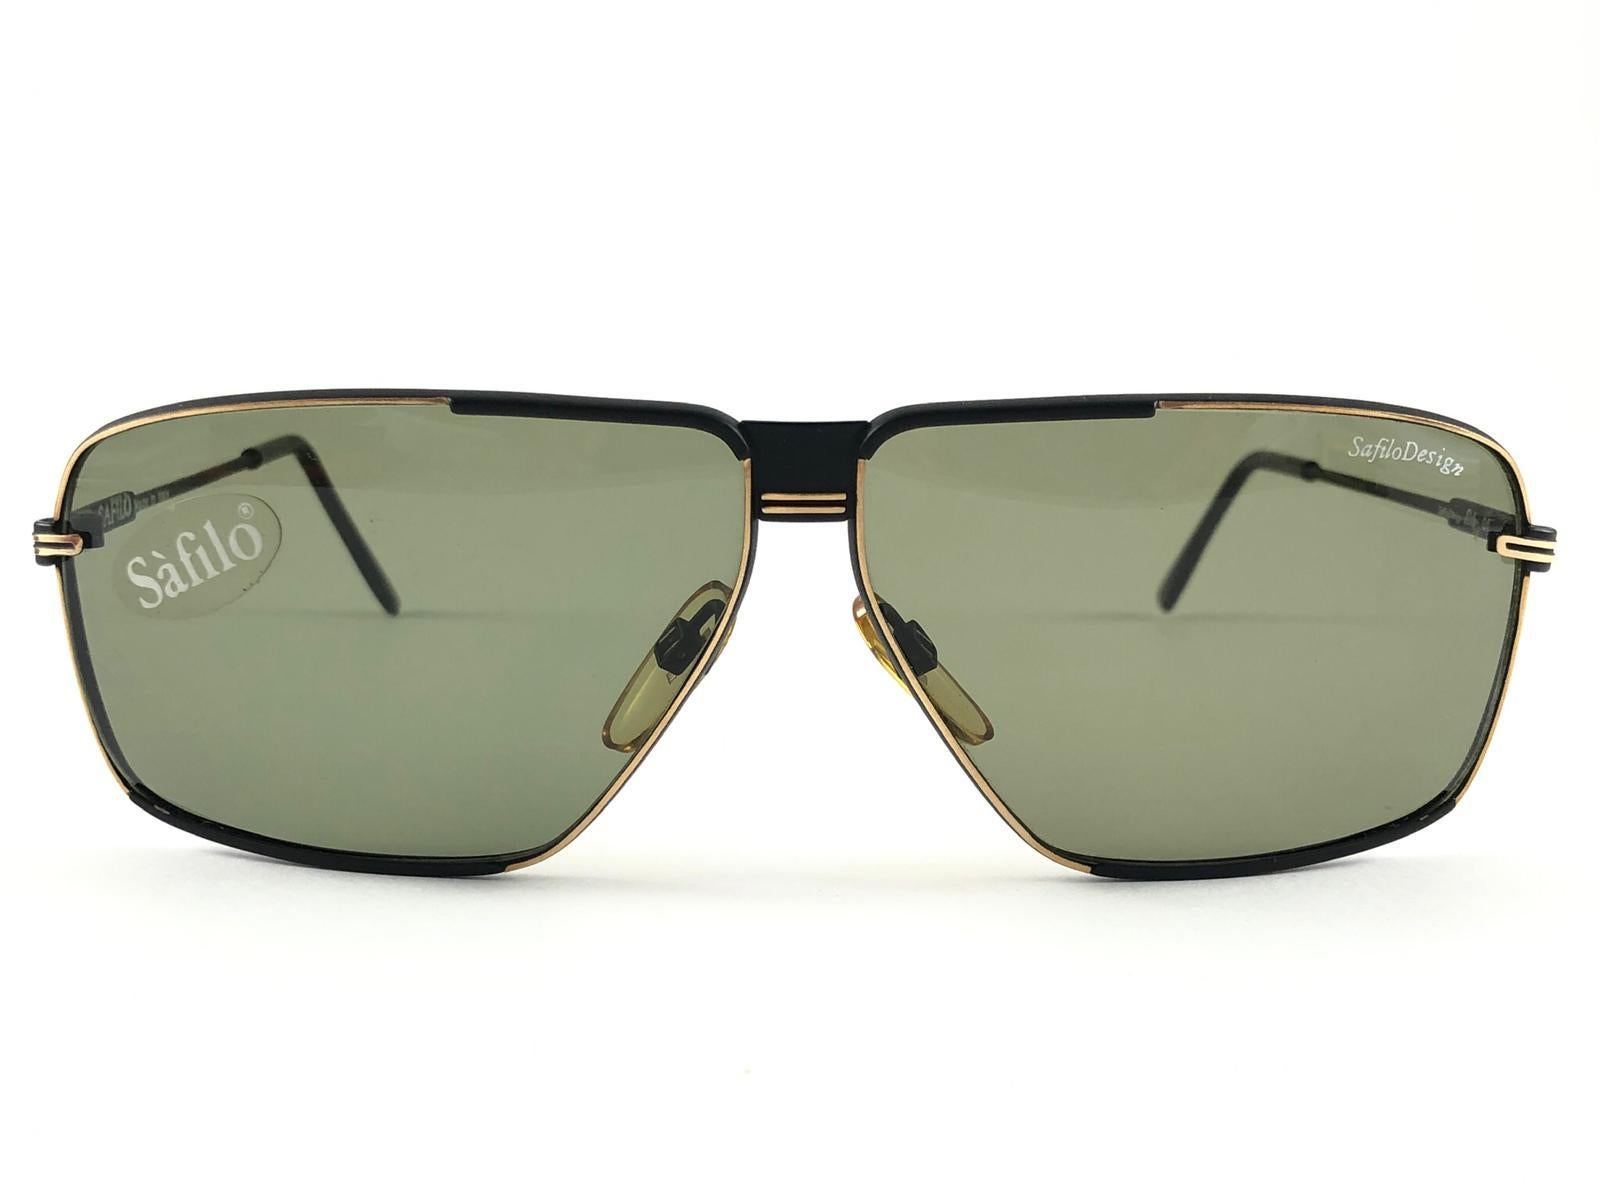 New Vintage Safilo, a balanced combination of Italian craftsmanship, design, functionality and striking aesthetics, this model showcases a black mate aviator frame holding green lenses.

New, never worn or displayed.
Made in Italy.

Measurements 